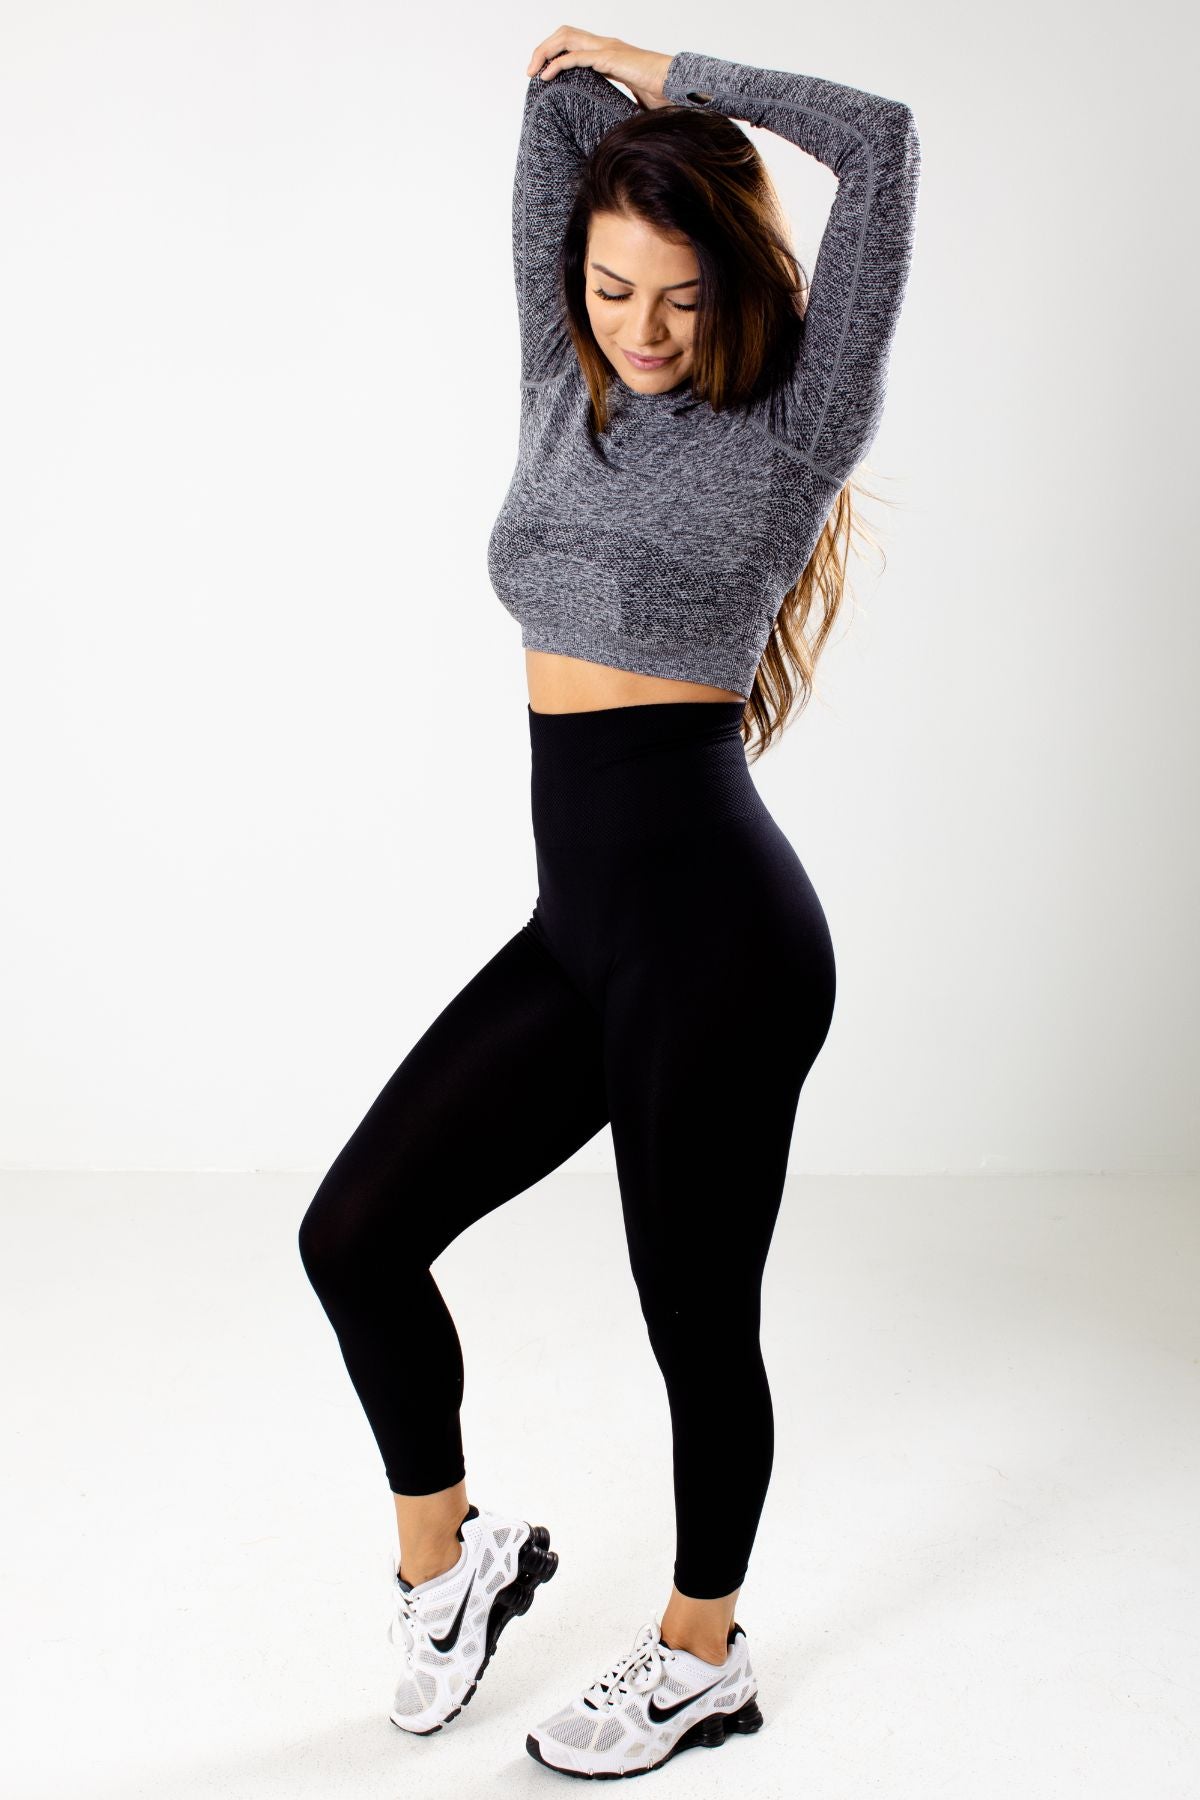 Dark Gray Cute and Comfortable Boutique Activewear Tops for Women